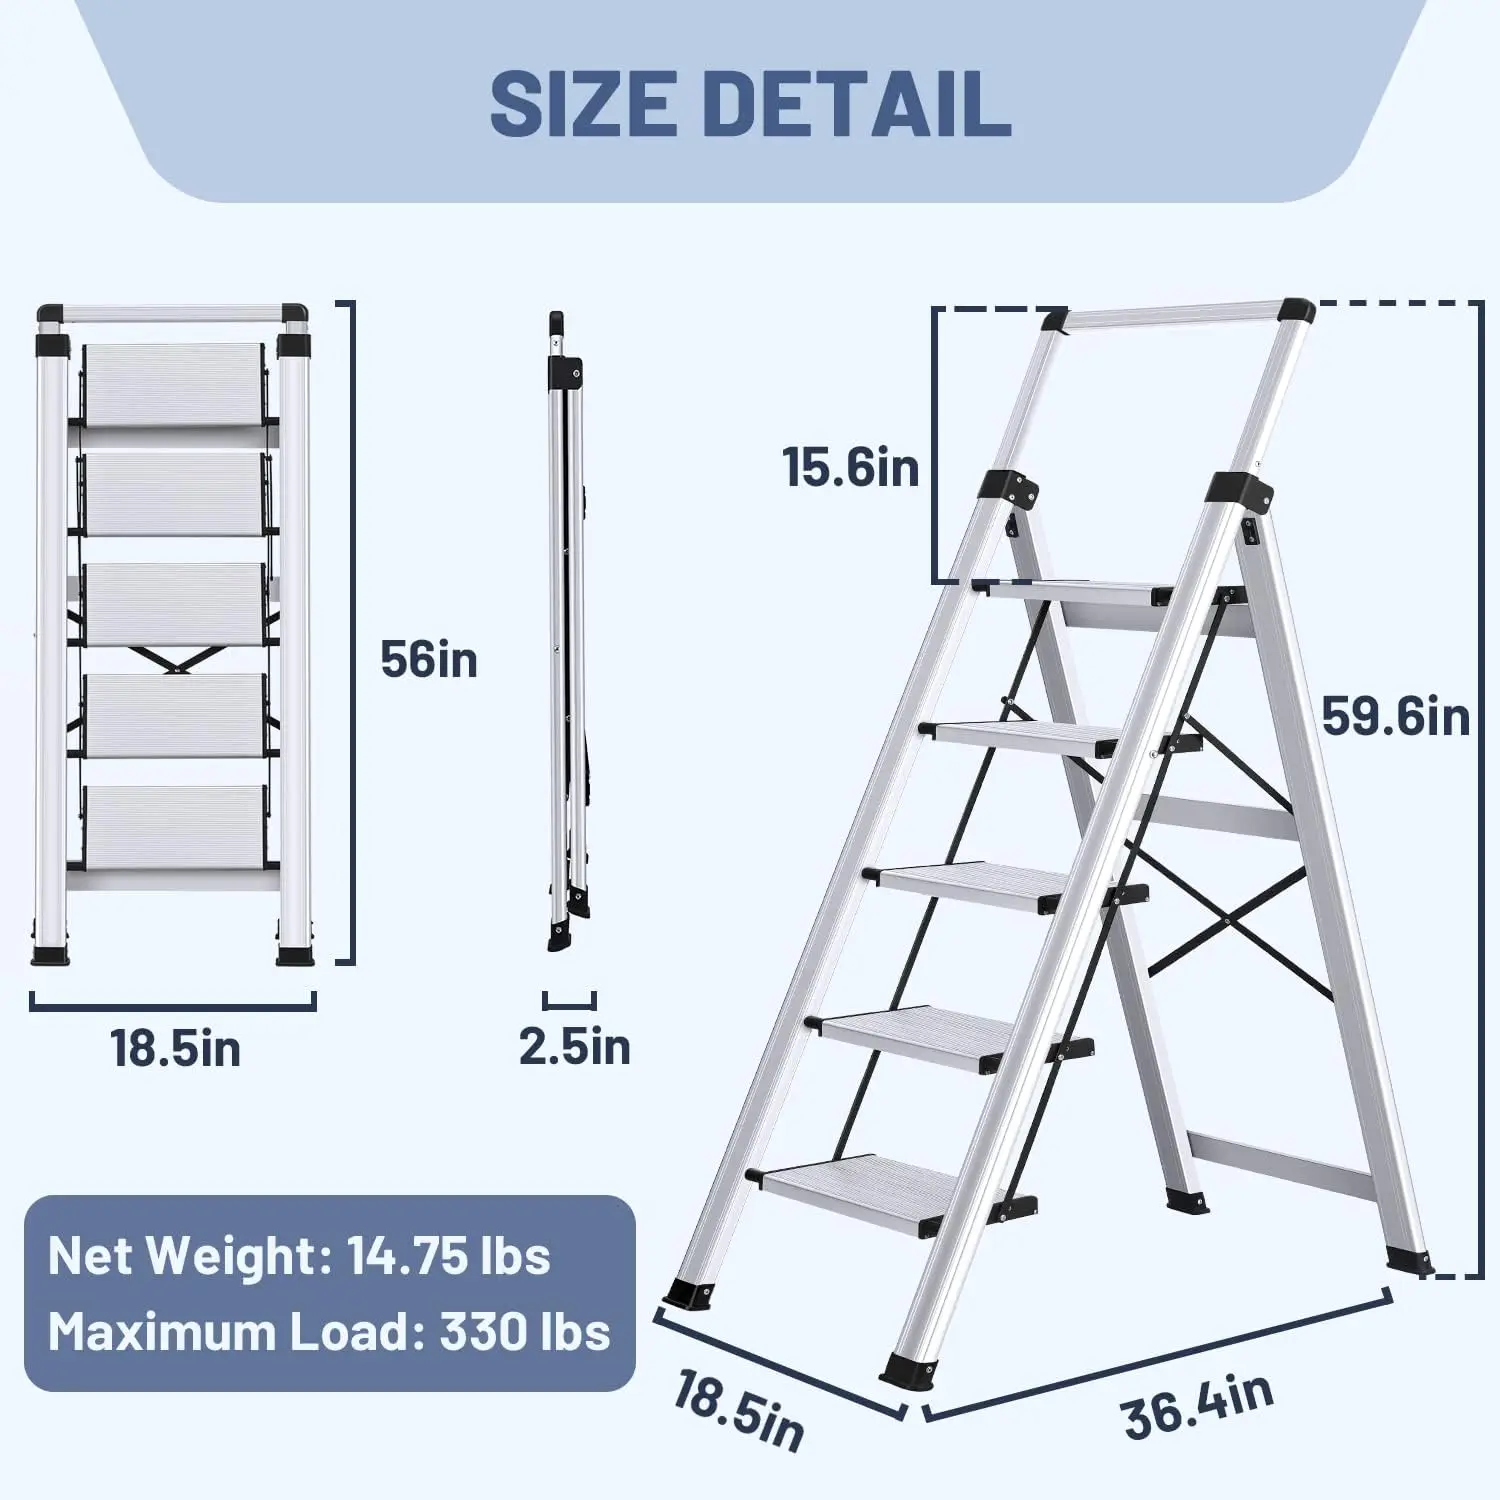 New 5 Step Ladder Retractable Handgrip Folding Step Stool with Anti-Slip Wide Pedal Aluminum Stool Ladders 5 Steps 330lbs Safety images - 6